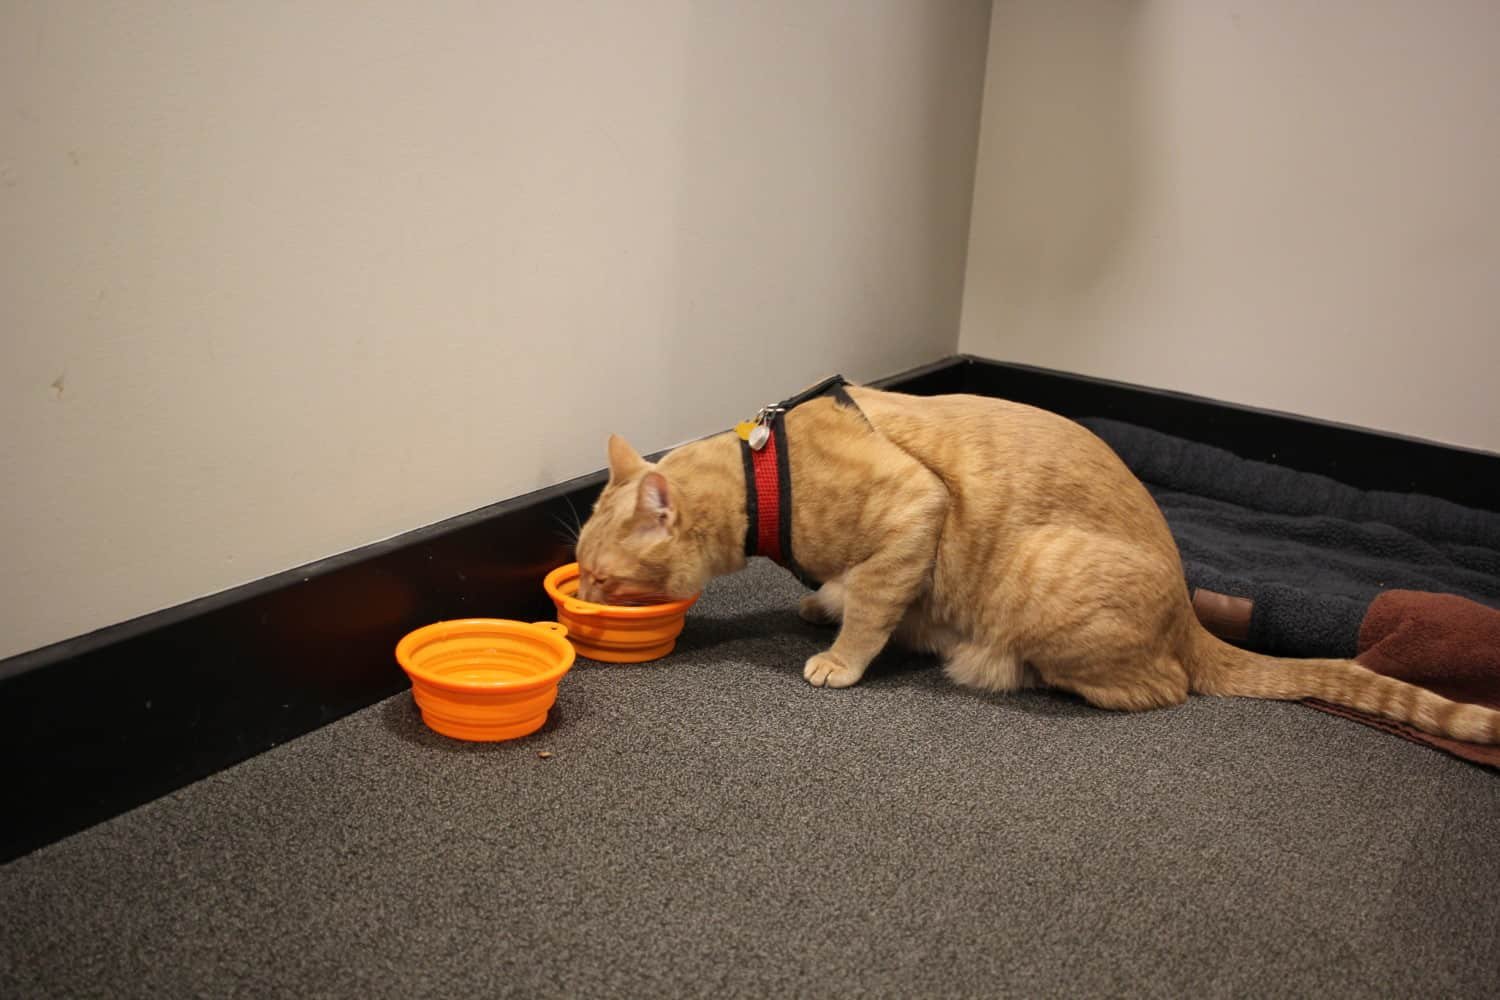 Fish cat drinking from collapsible bowl in hotel room